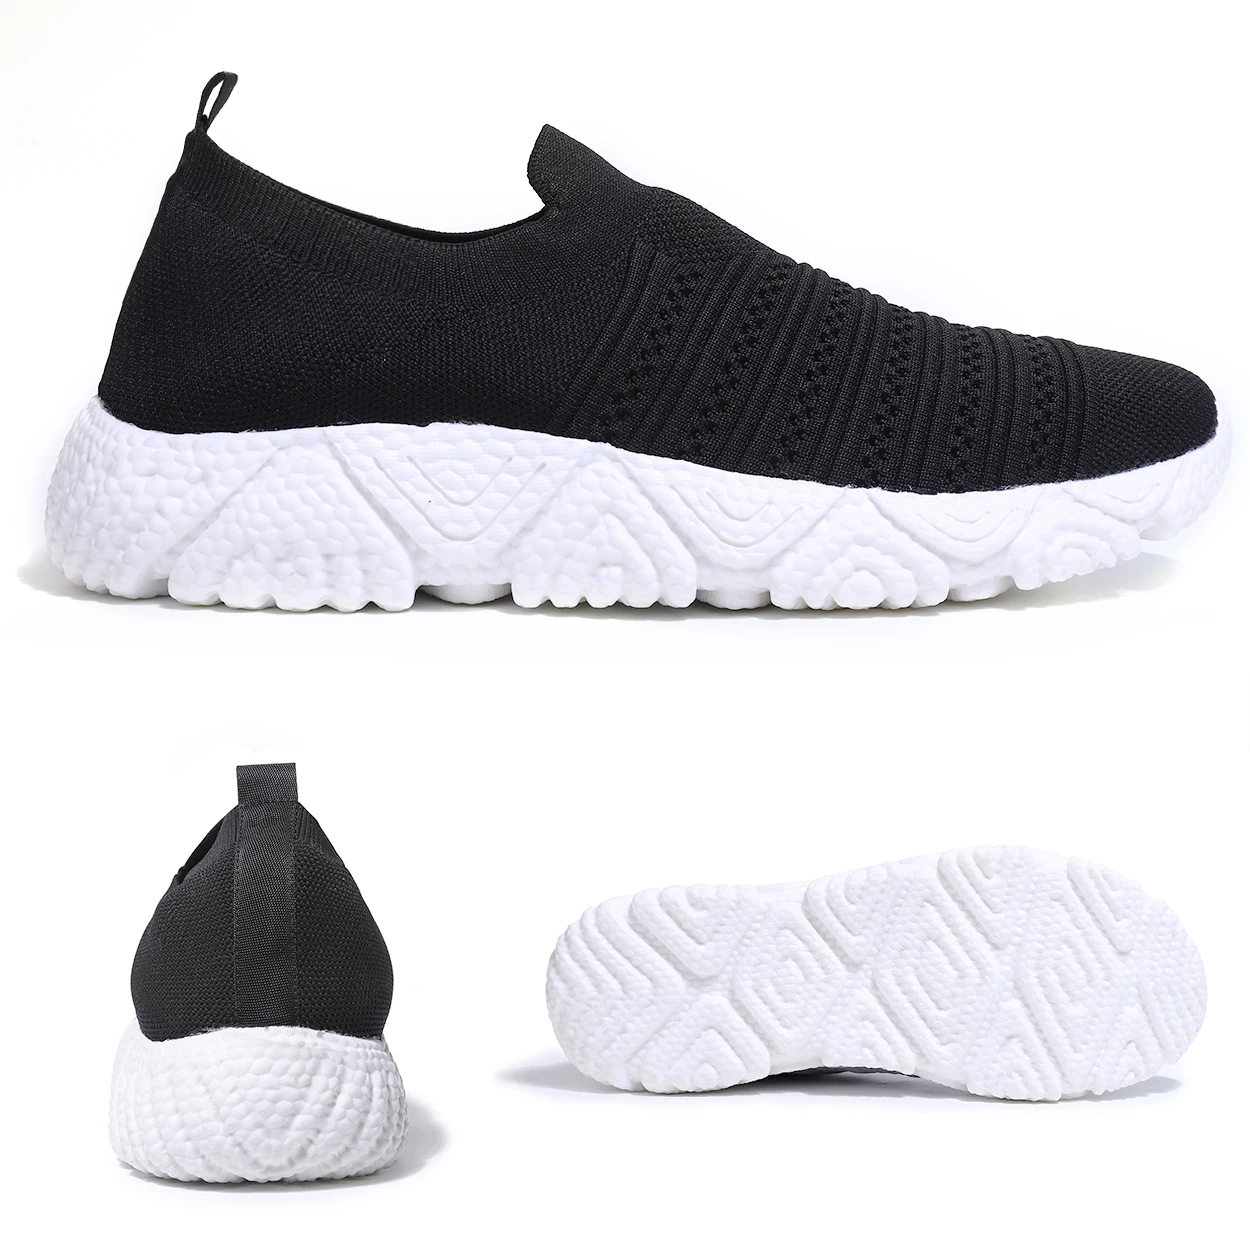 

High-quality men shoes arch support slip-on anti-slippery light wight women sneaker shoes outdoor sport casual sock shoes